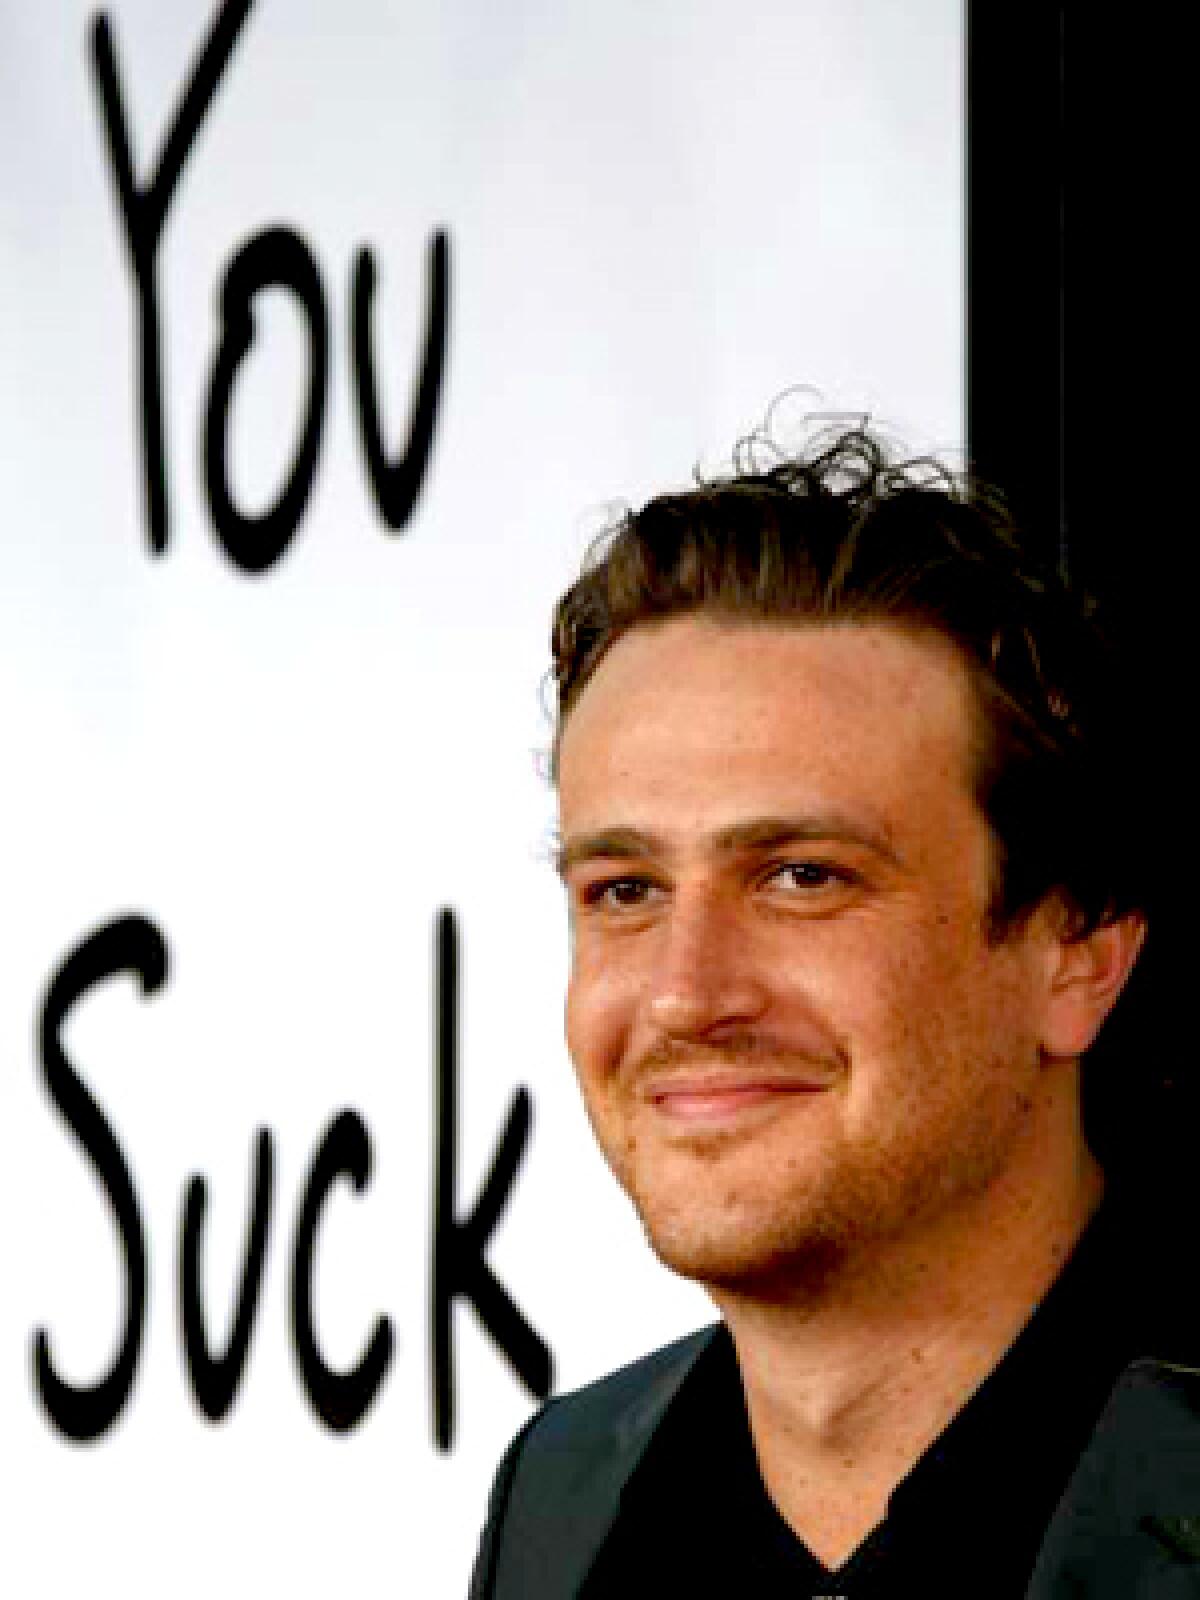 Jason Segel is the latest, after "Freaks" colleague Seth Rogen, to feel the guiding hand of Apatow